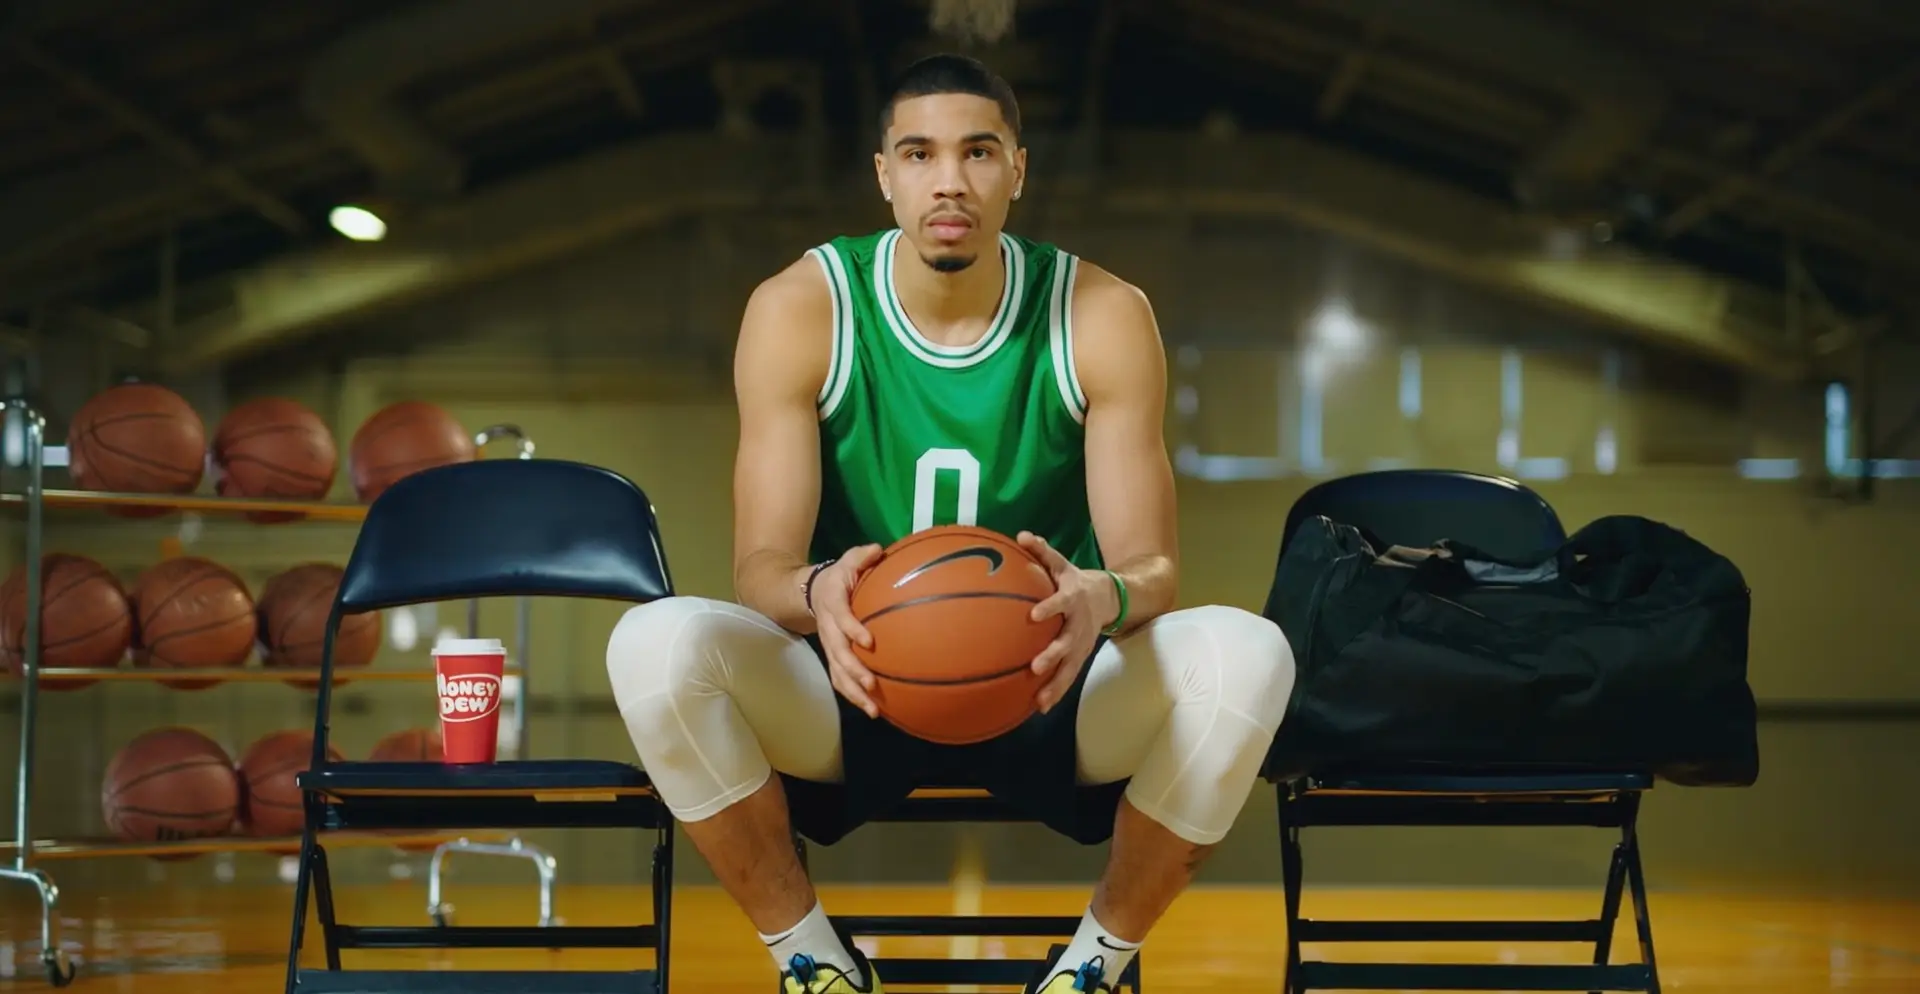 A basketball player sitting on a live 2023 home page chair holding a ball.